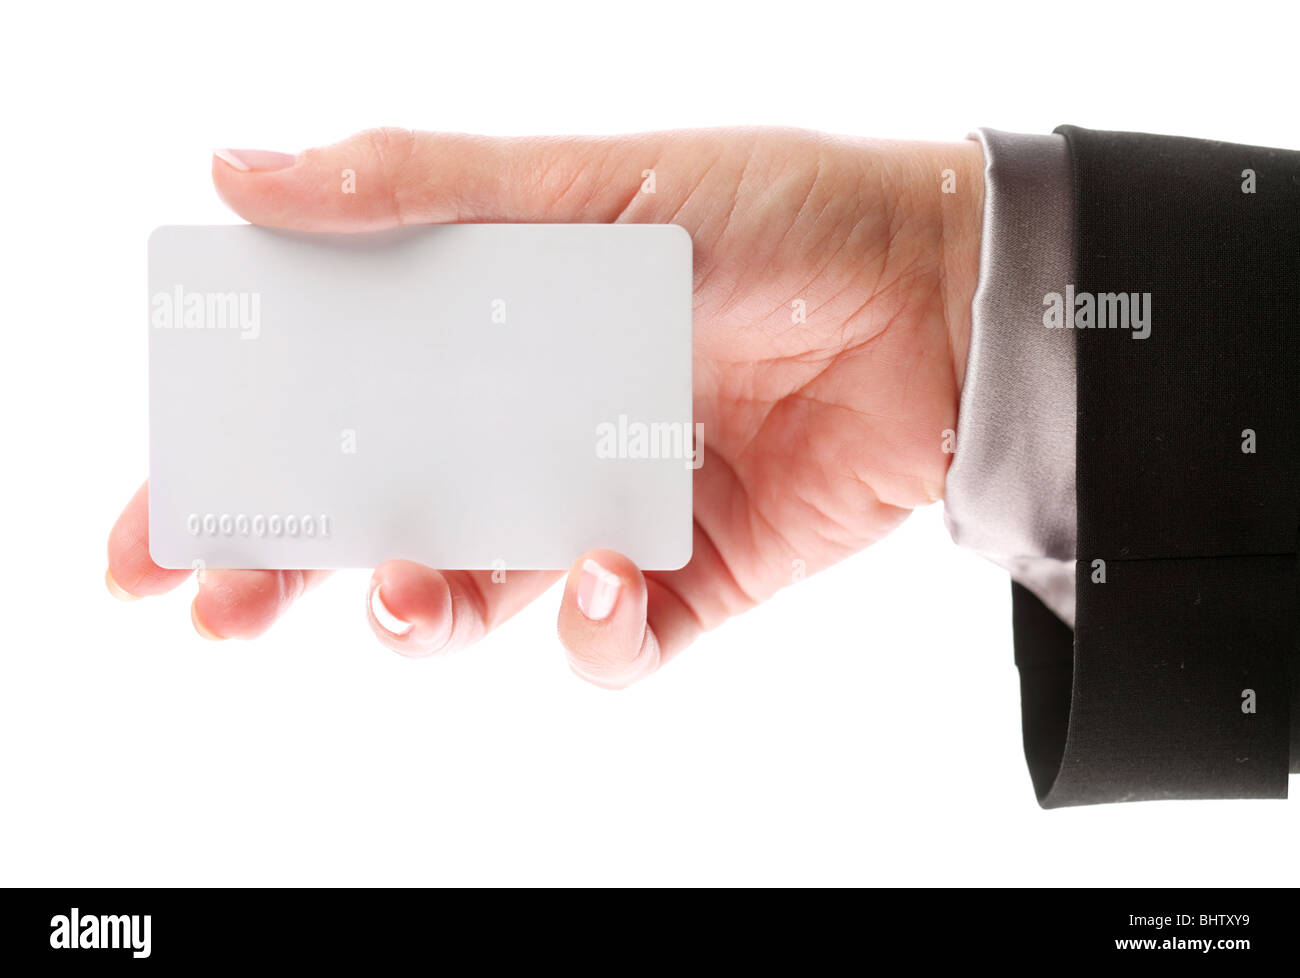 Credit card in woman hand Stock Photo